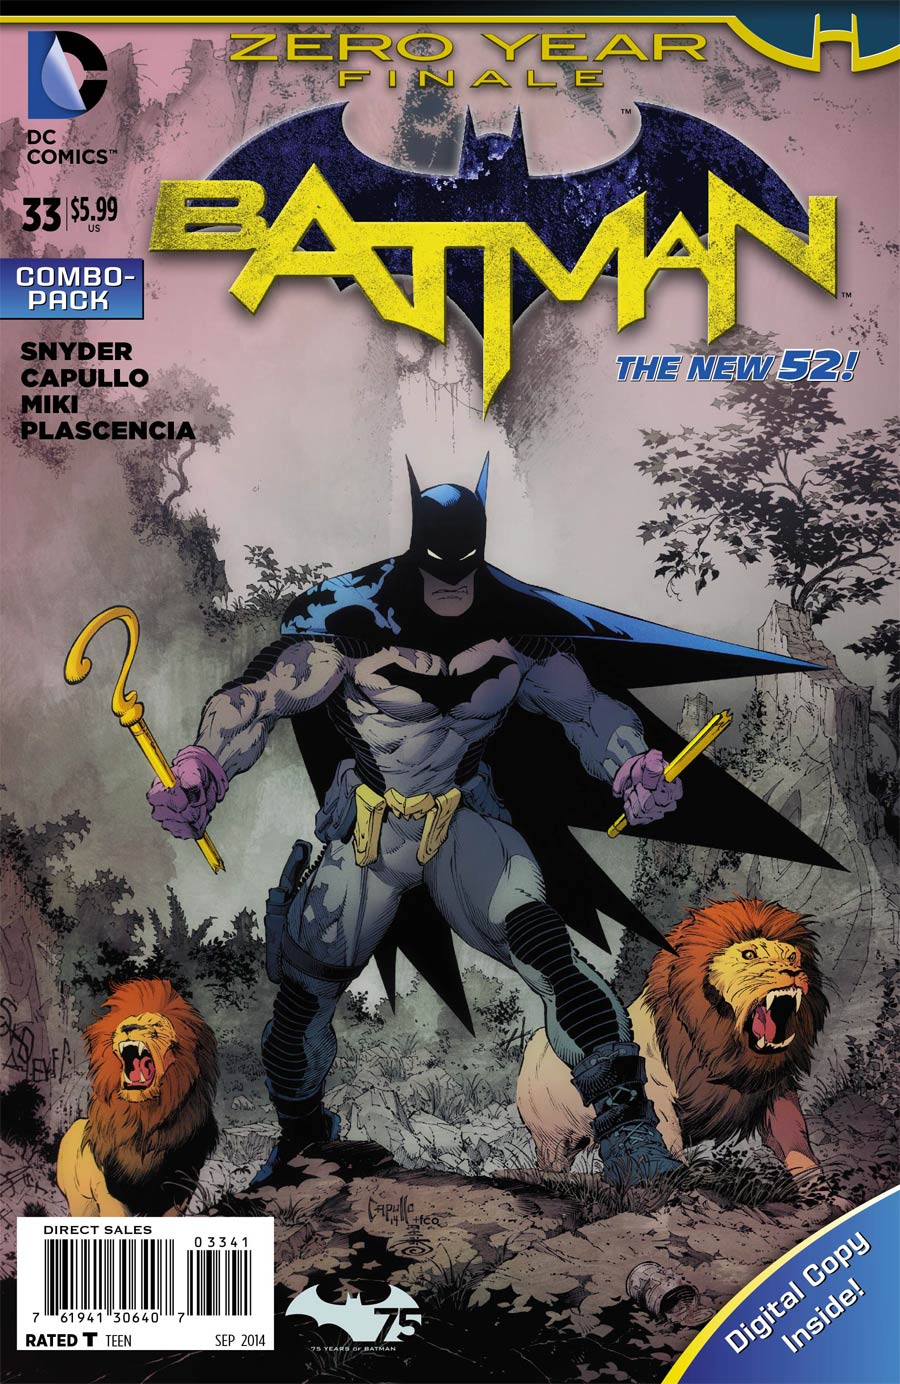 Batman Vol 2 #33 Cover C Combo Pack With Polybag (Zero Year Tie-In)